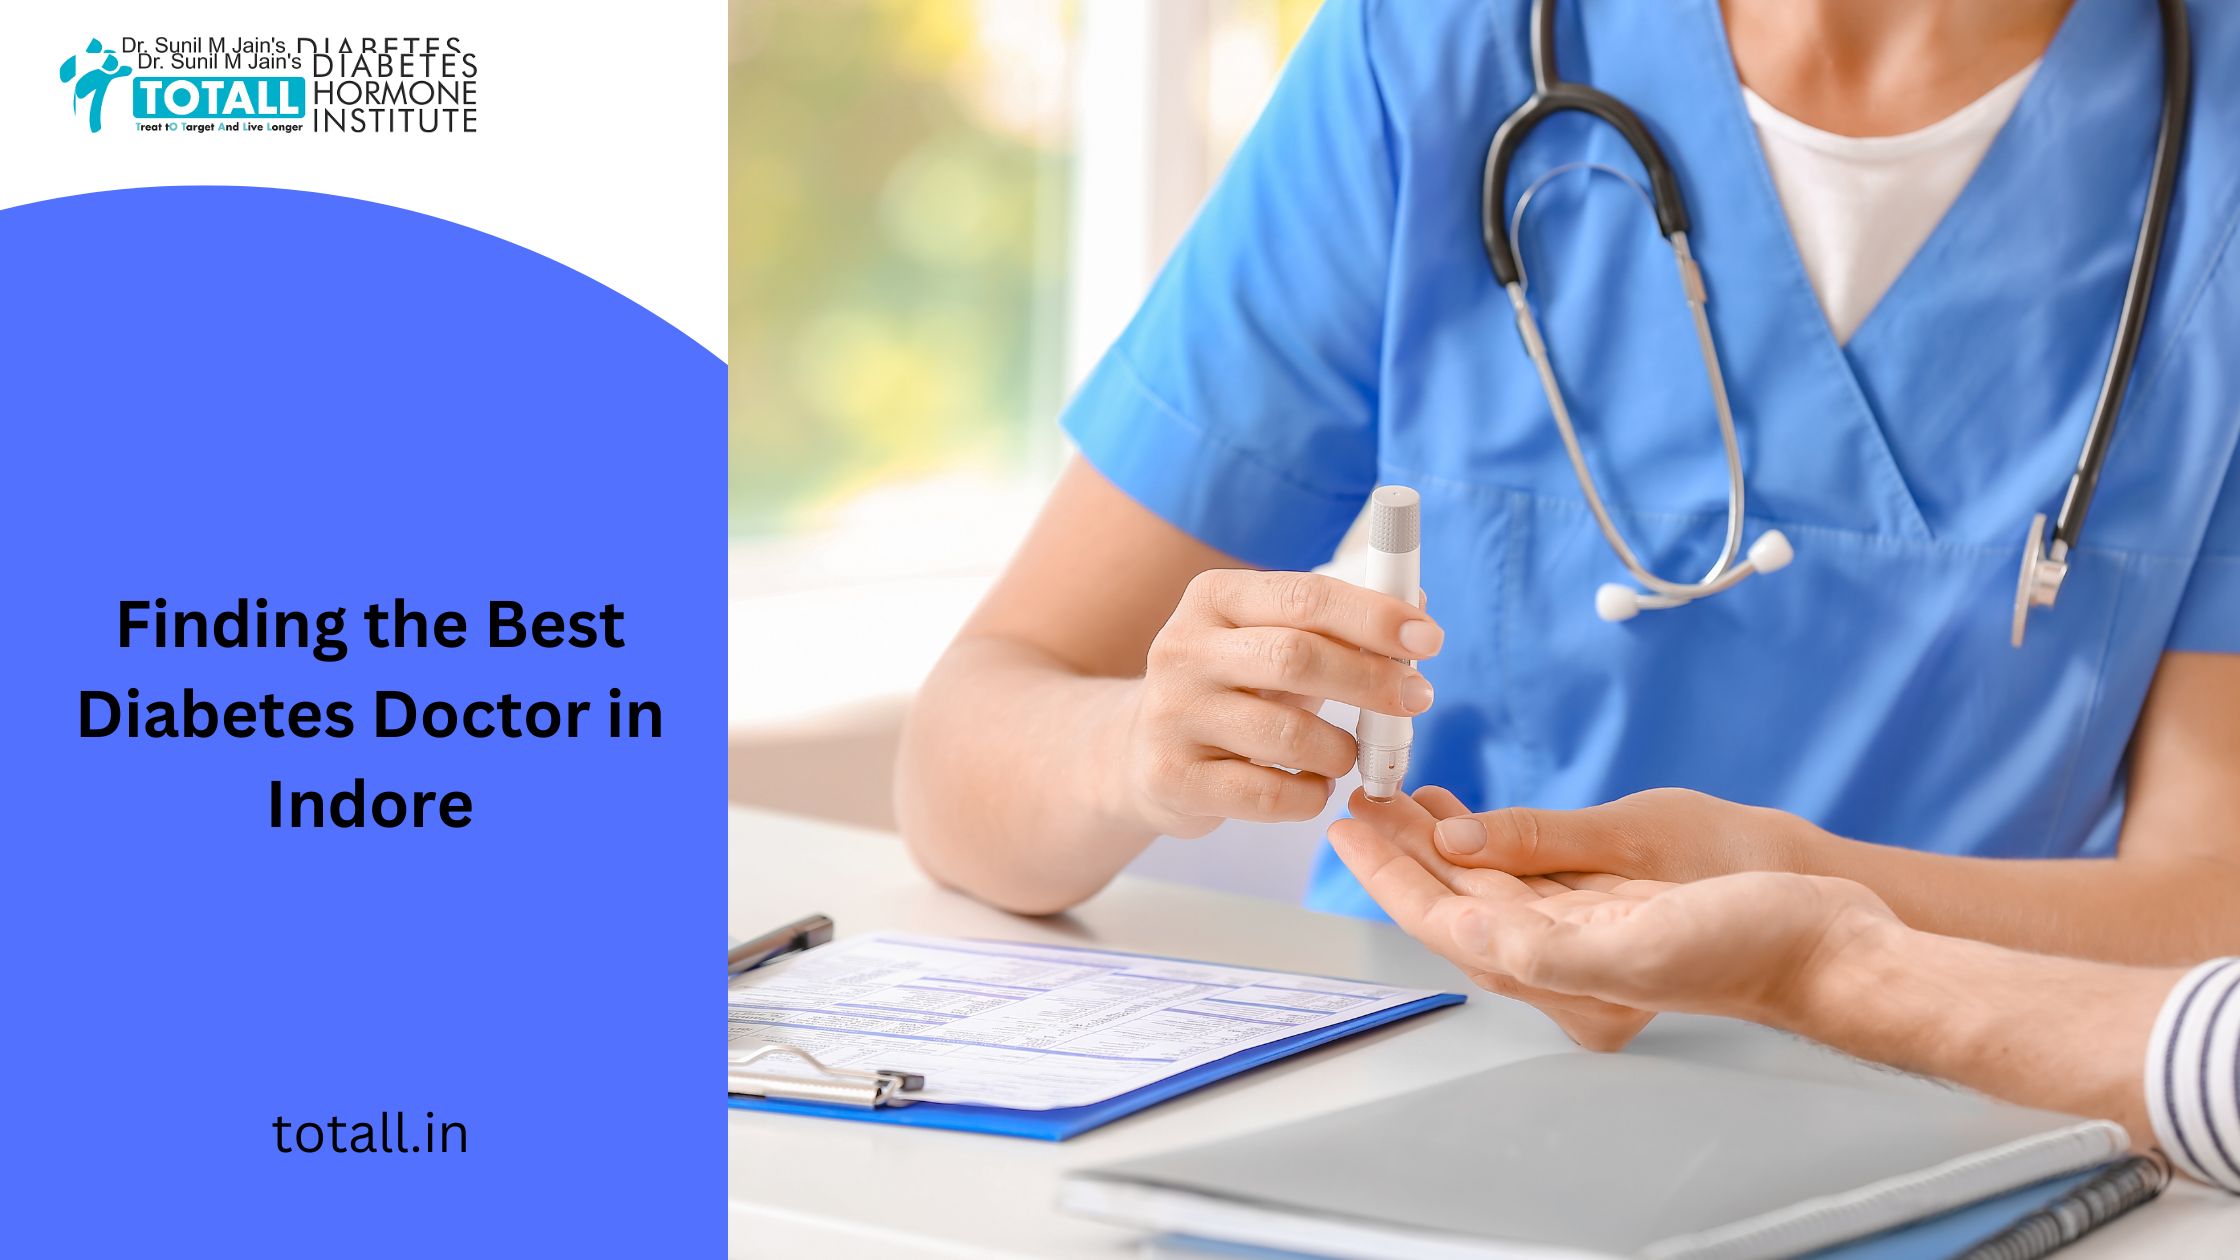 Finding the Best Diabetes Doctor in Indore